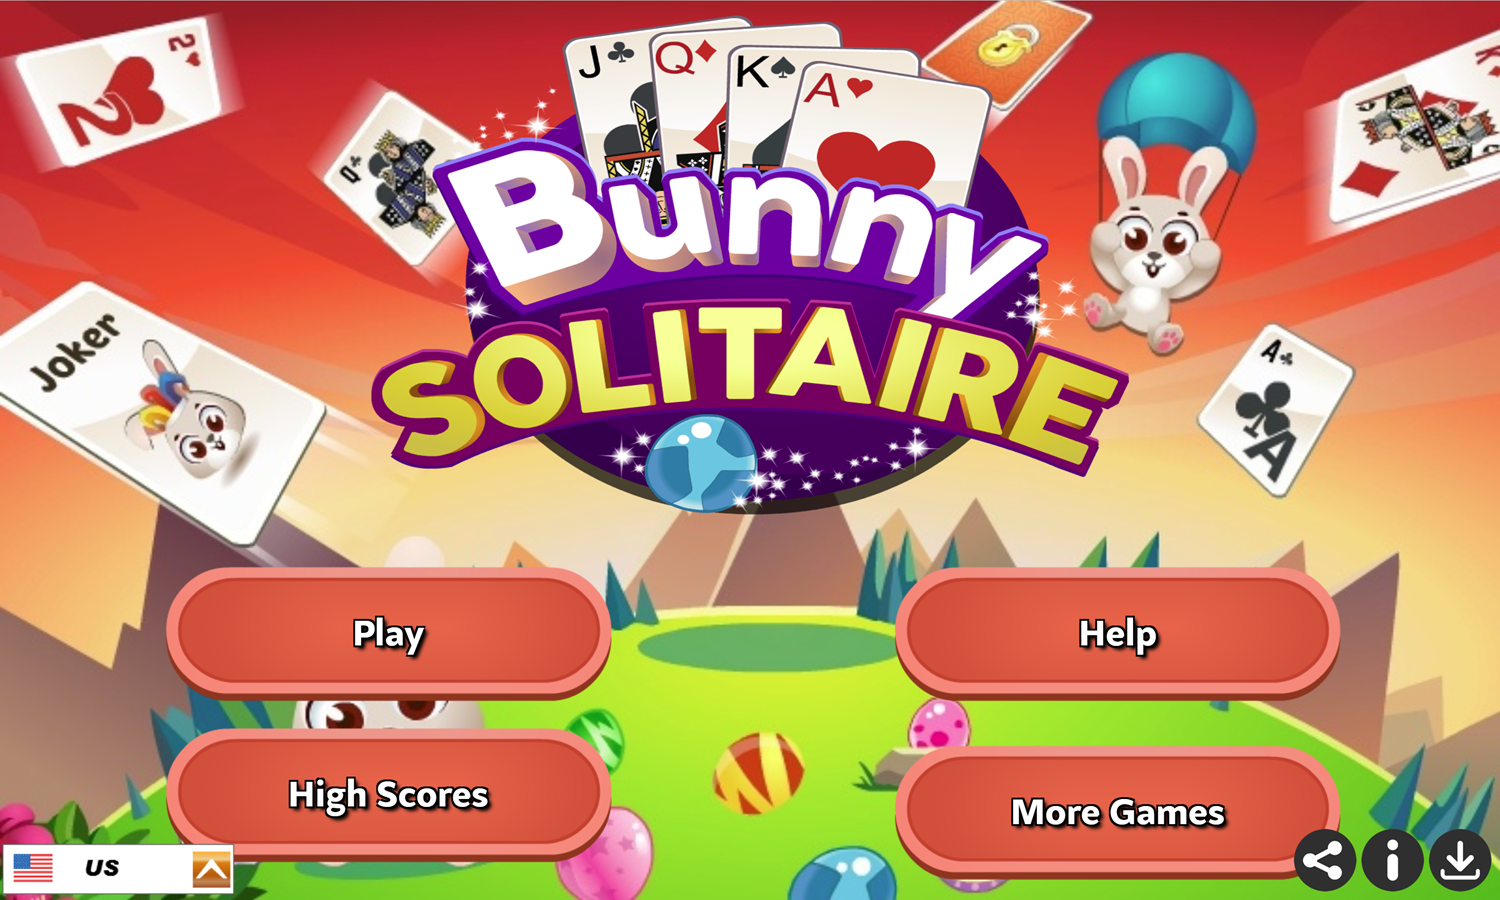 Bunny Solitaire Game Welcome Screen Screenshot.